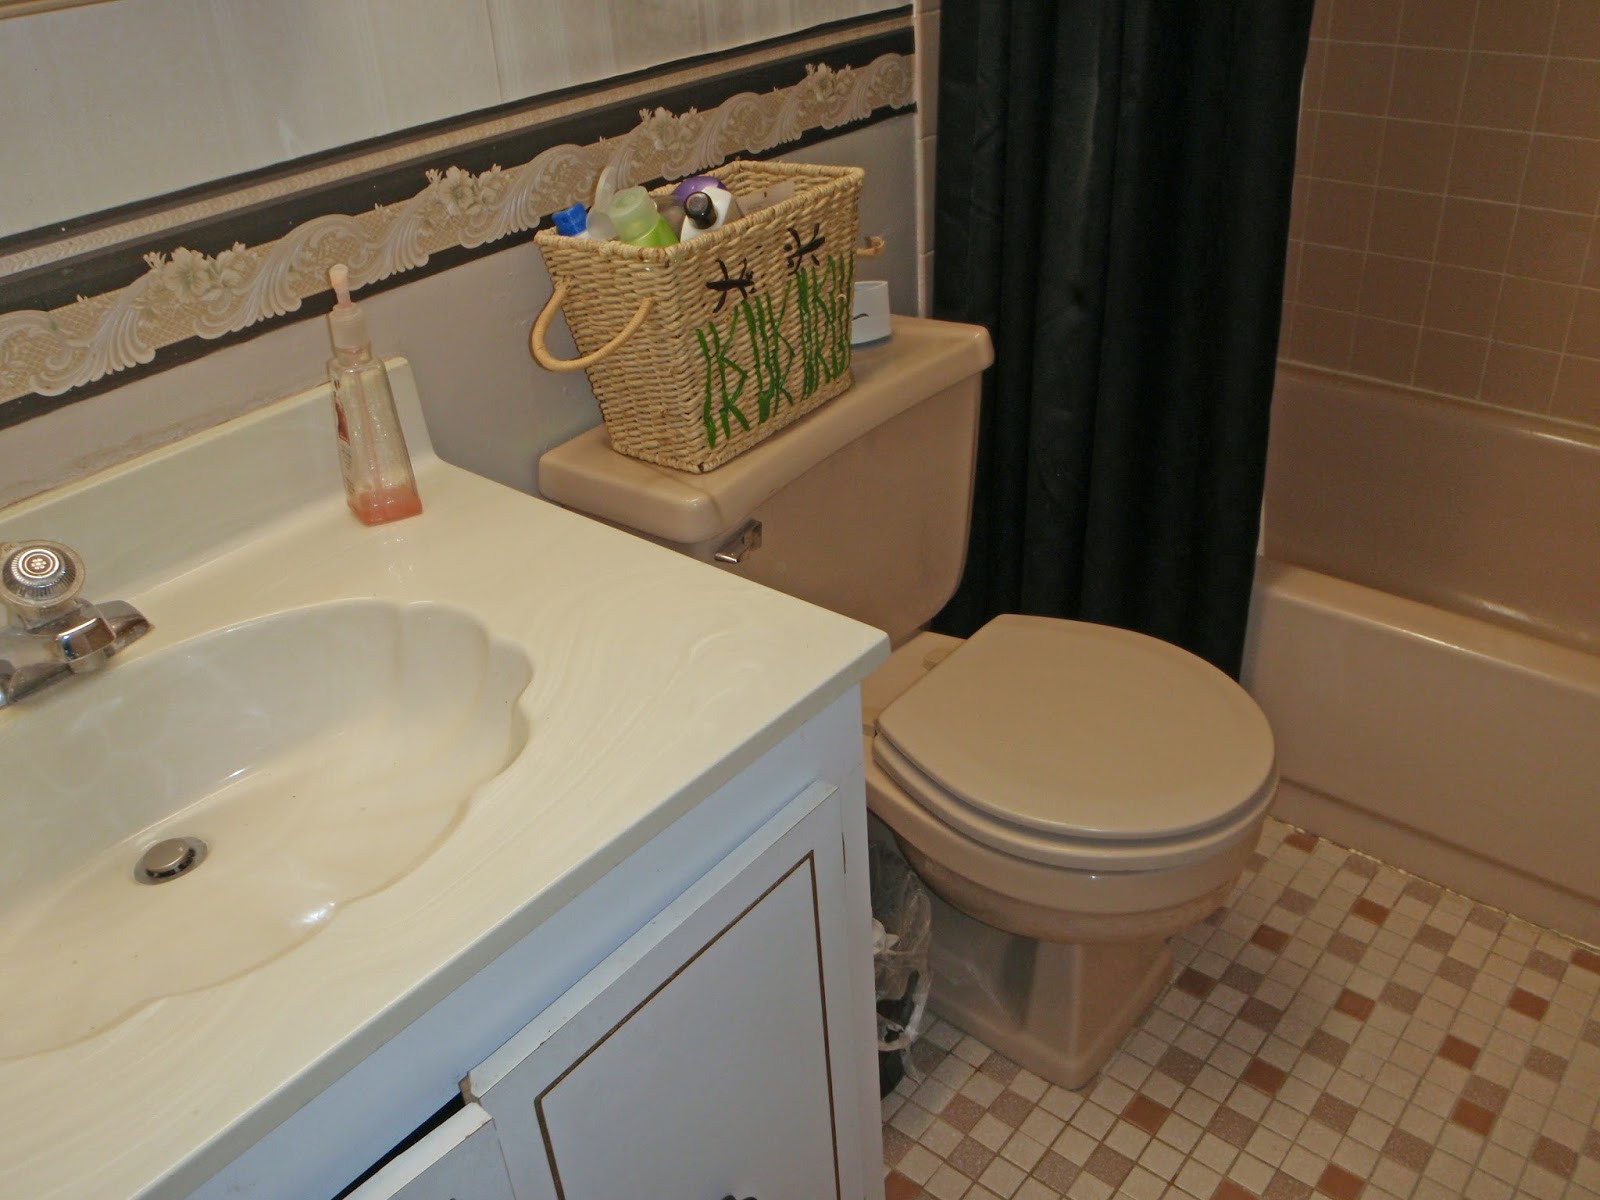 The Obligatory Blog: The Demise and Rebirth of Bathroom #1